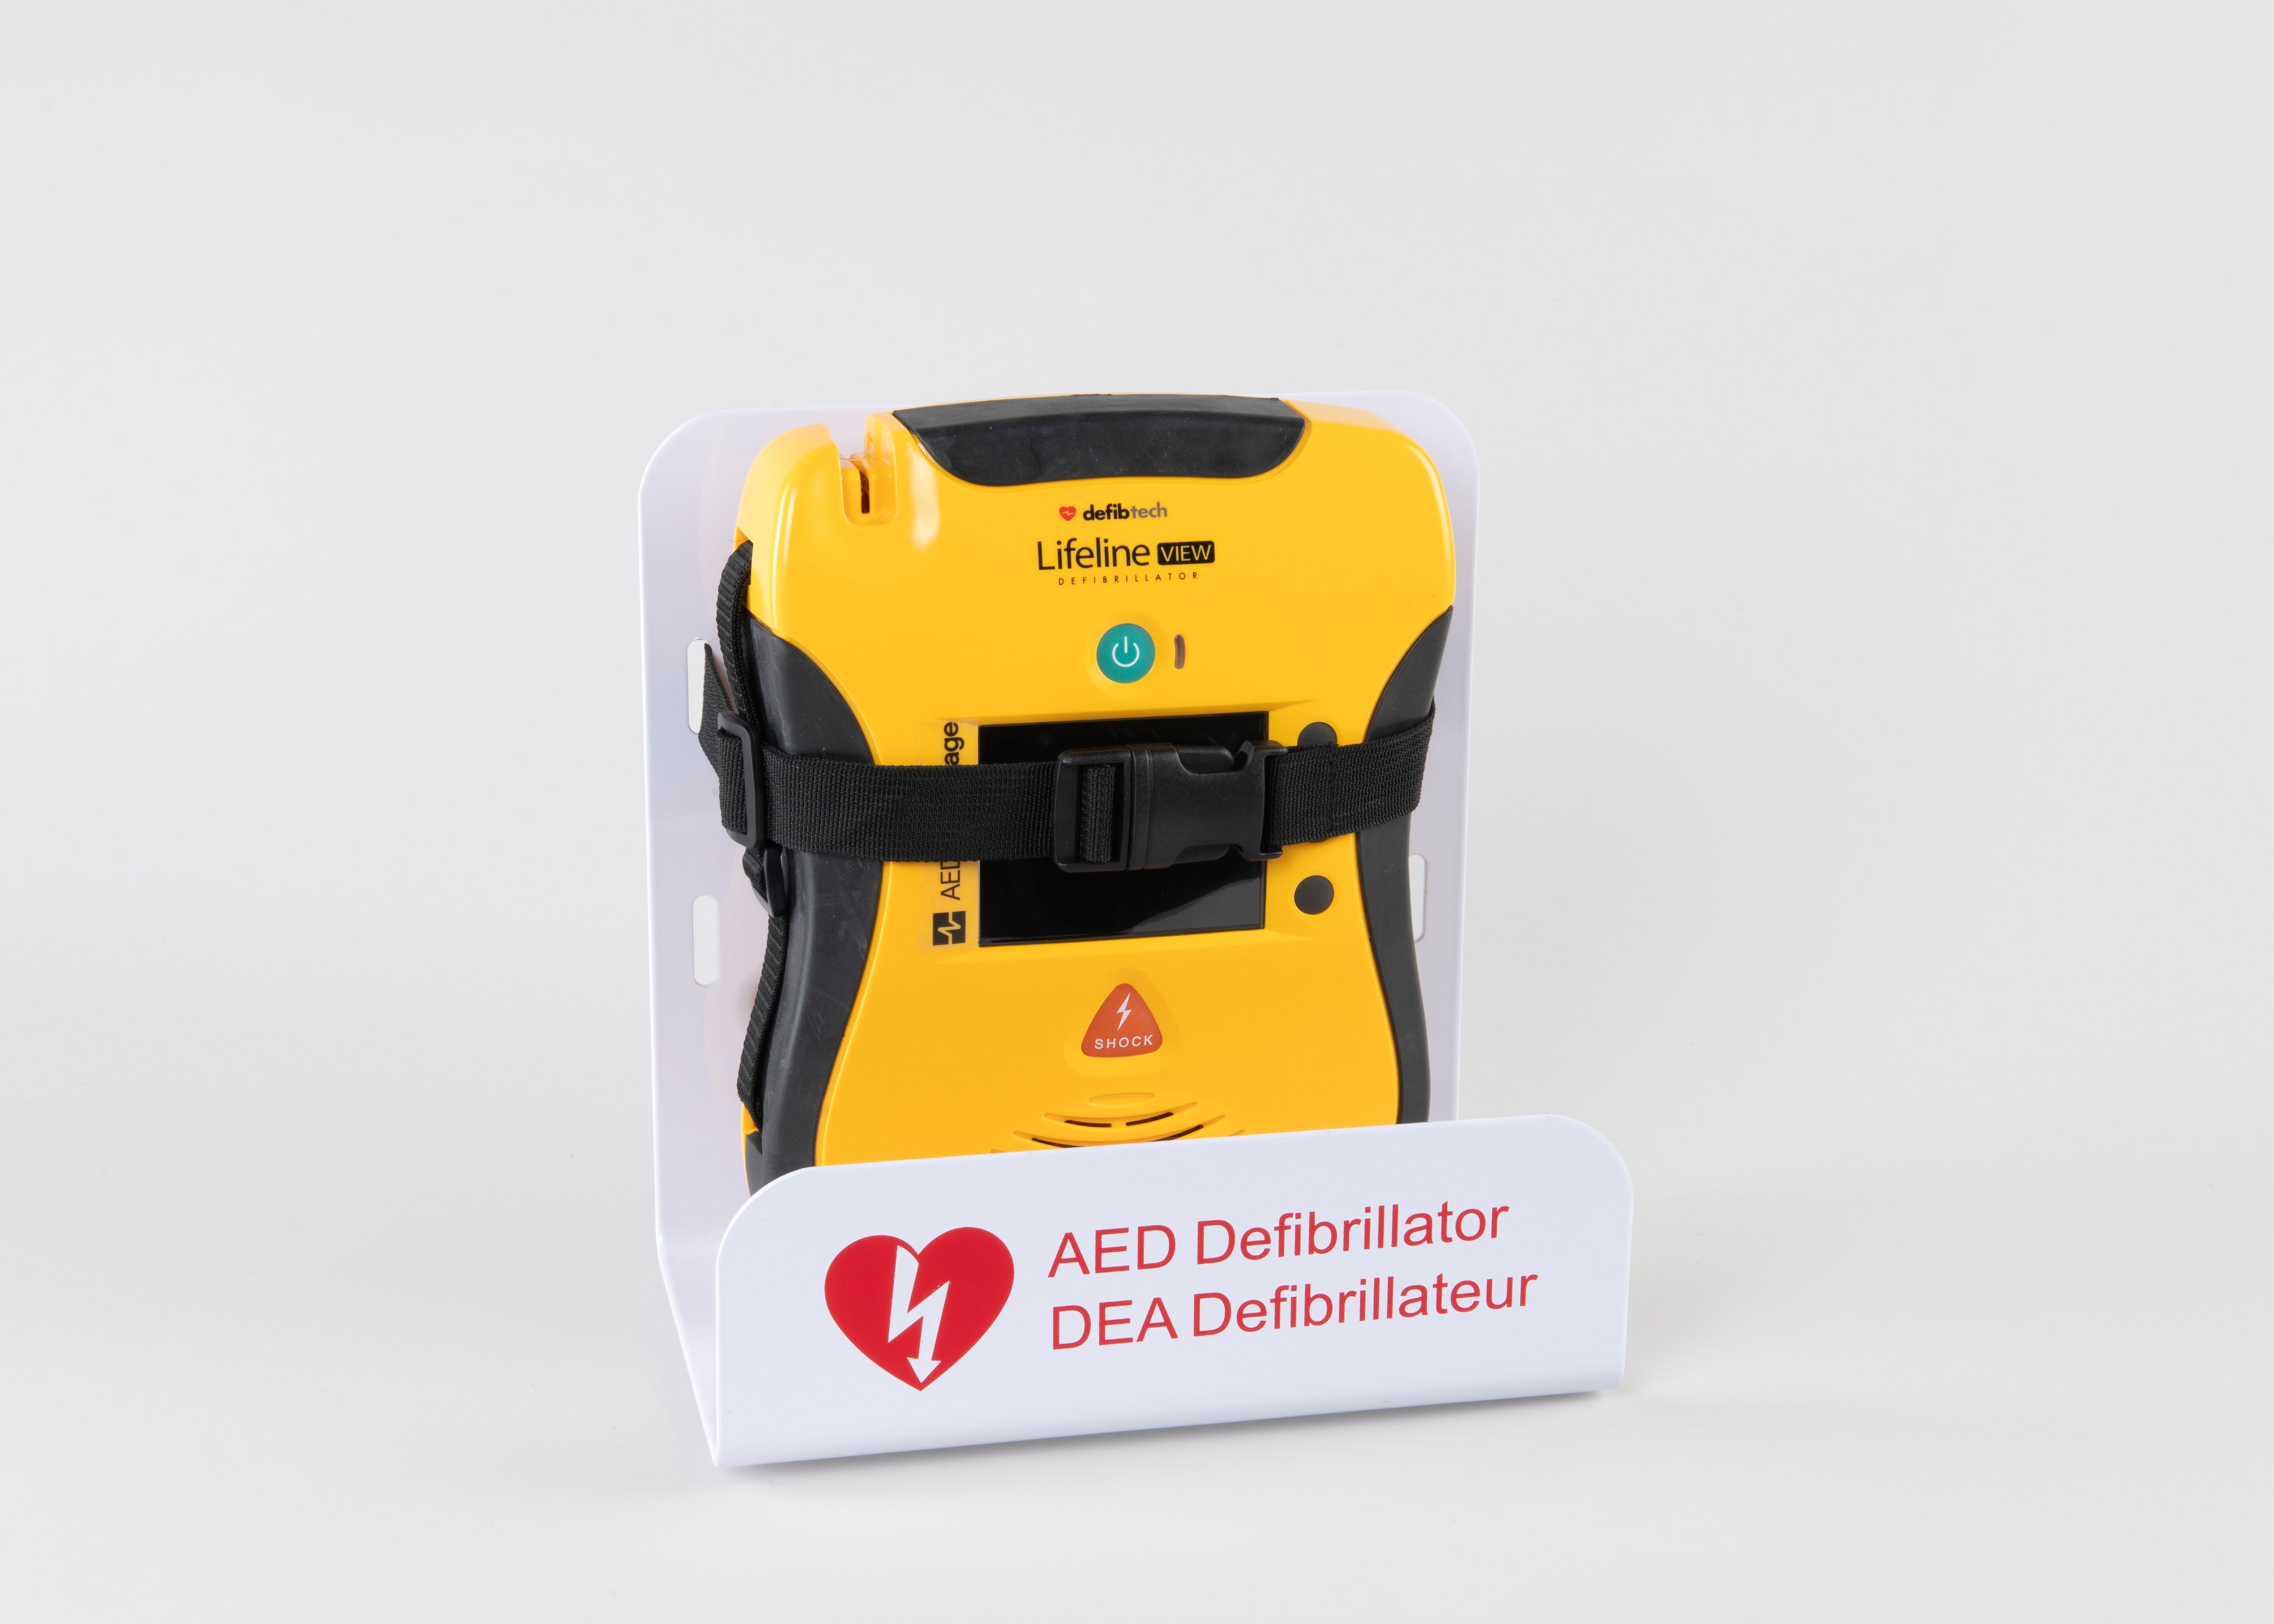 A black and yellow Defibtech Lifeline VIEW AED strapped into a white metal wall mount bracket